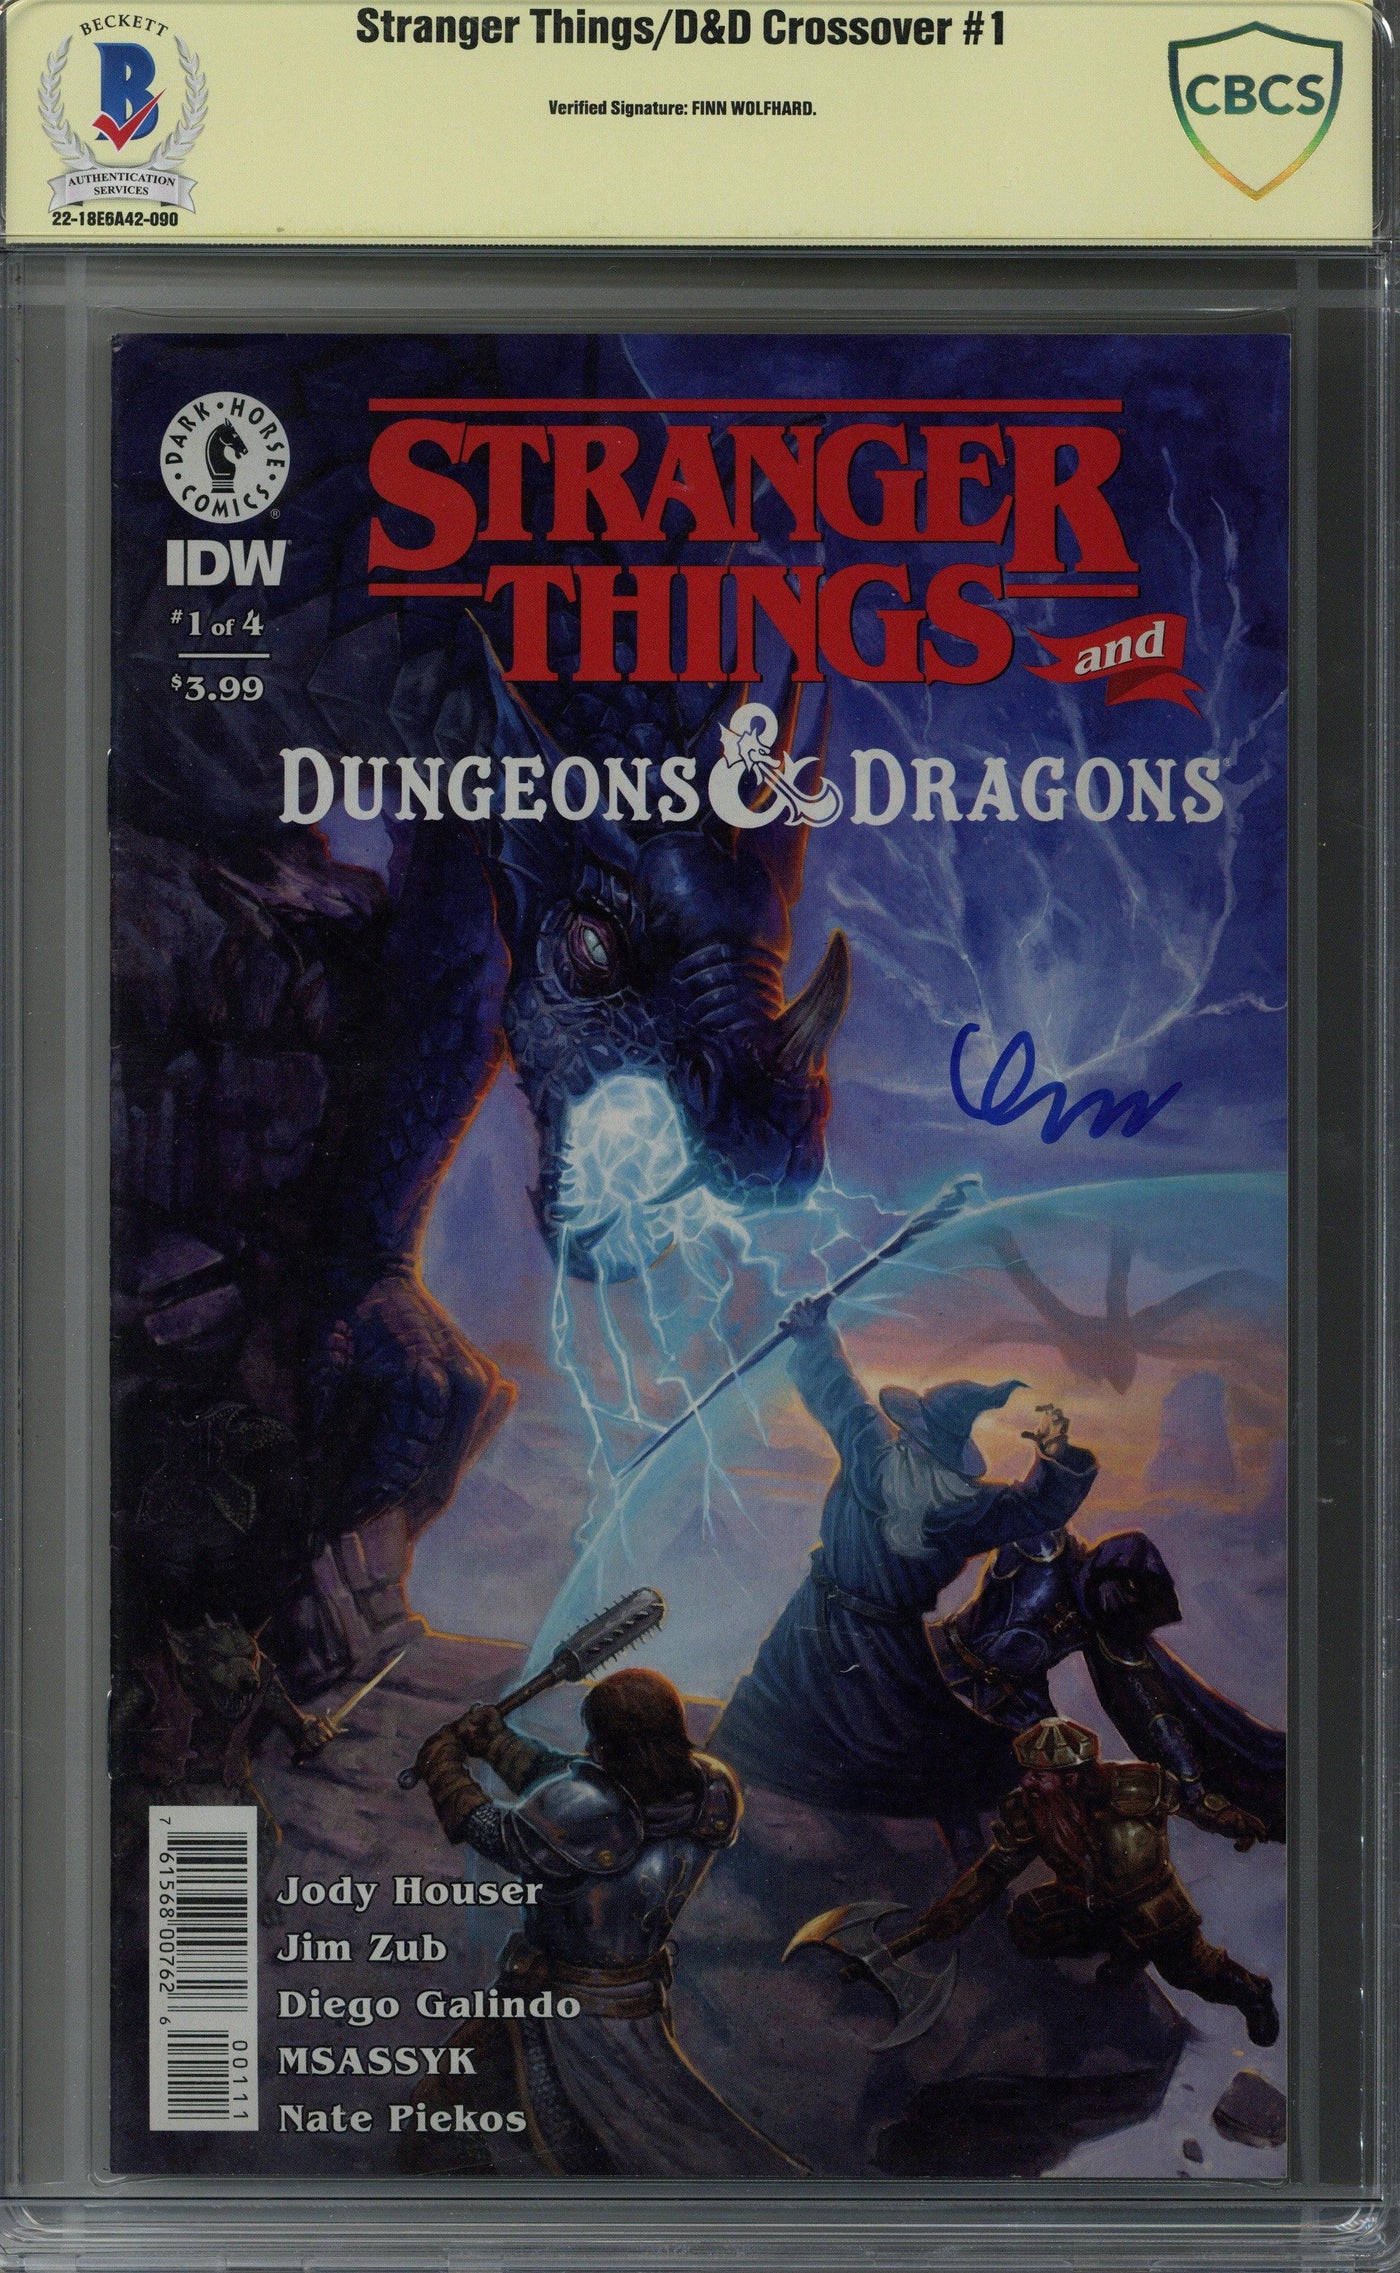 Finn Wolfhard Signed Stranger Things Dungeons & Dragons Comic Book Signed CBCS 2